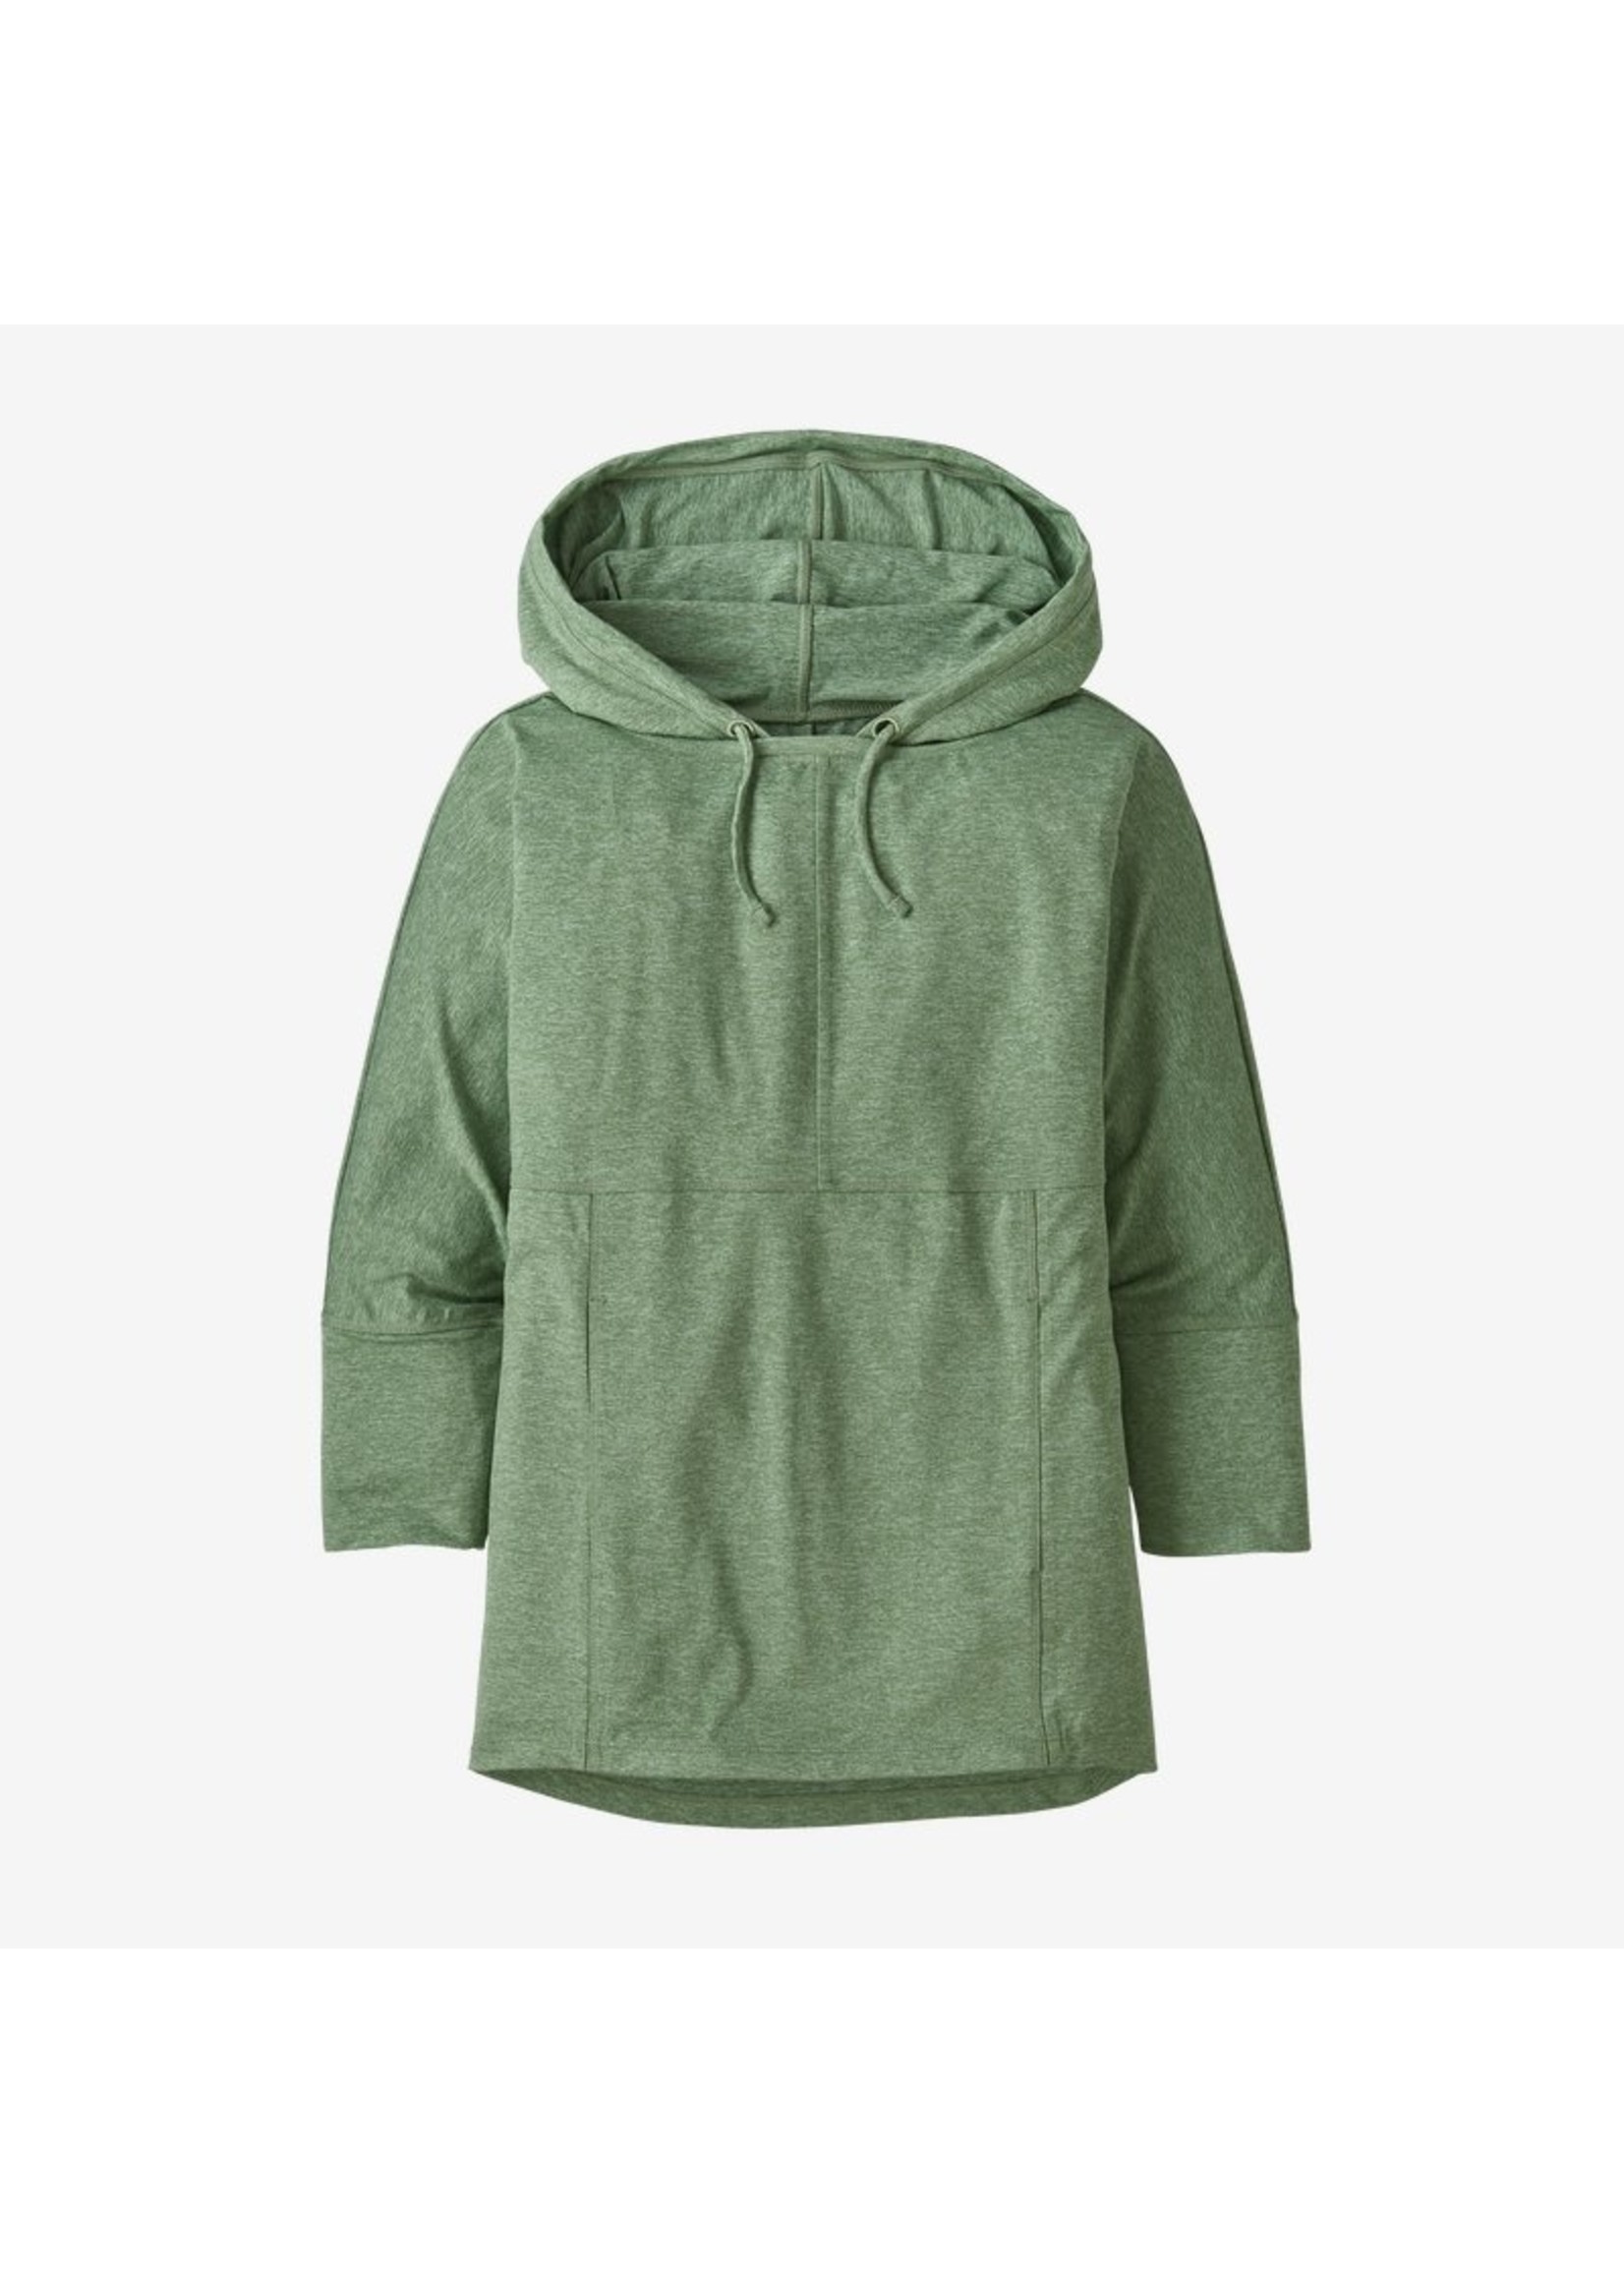 Patagonia Patagonia Women's Seabrook Hooded Pullover